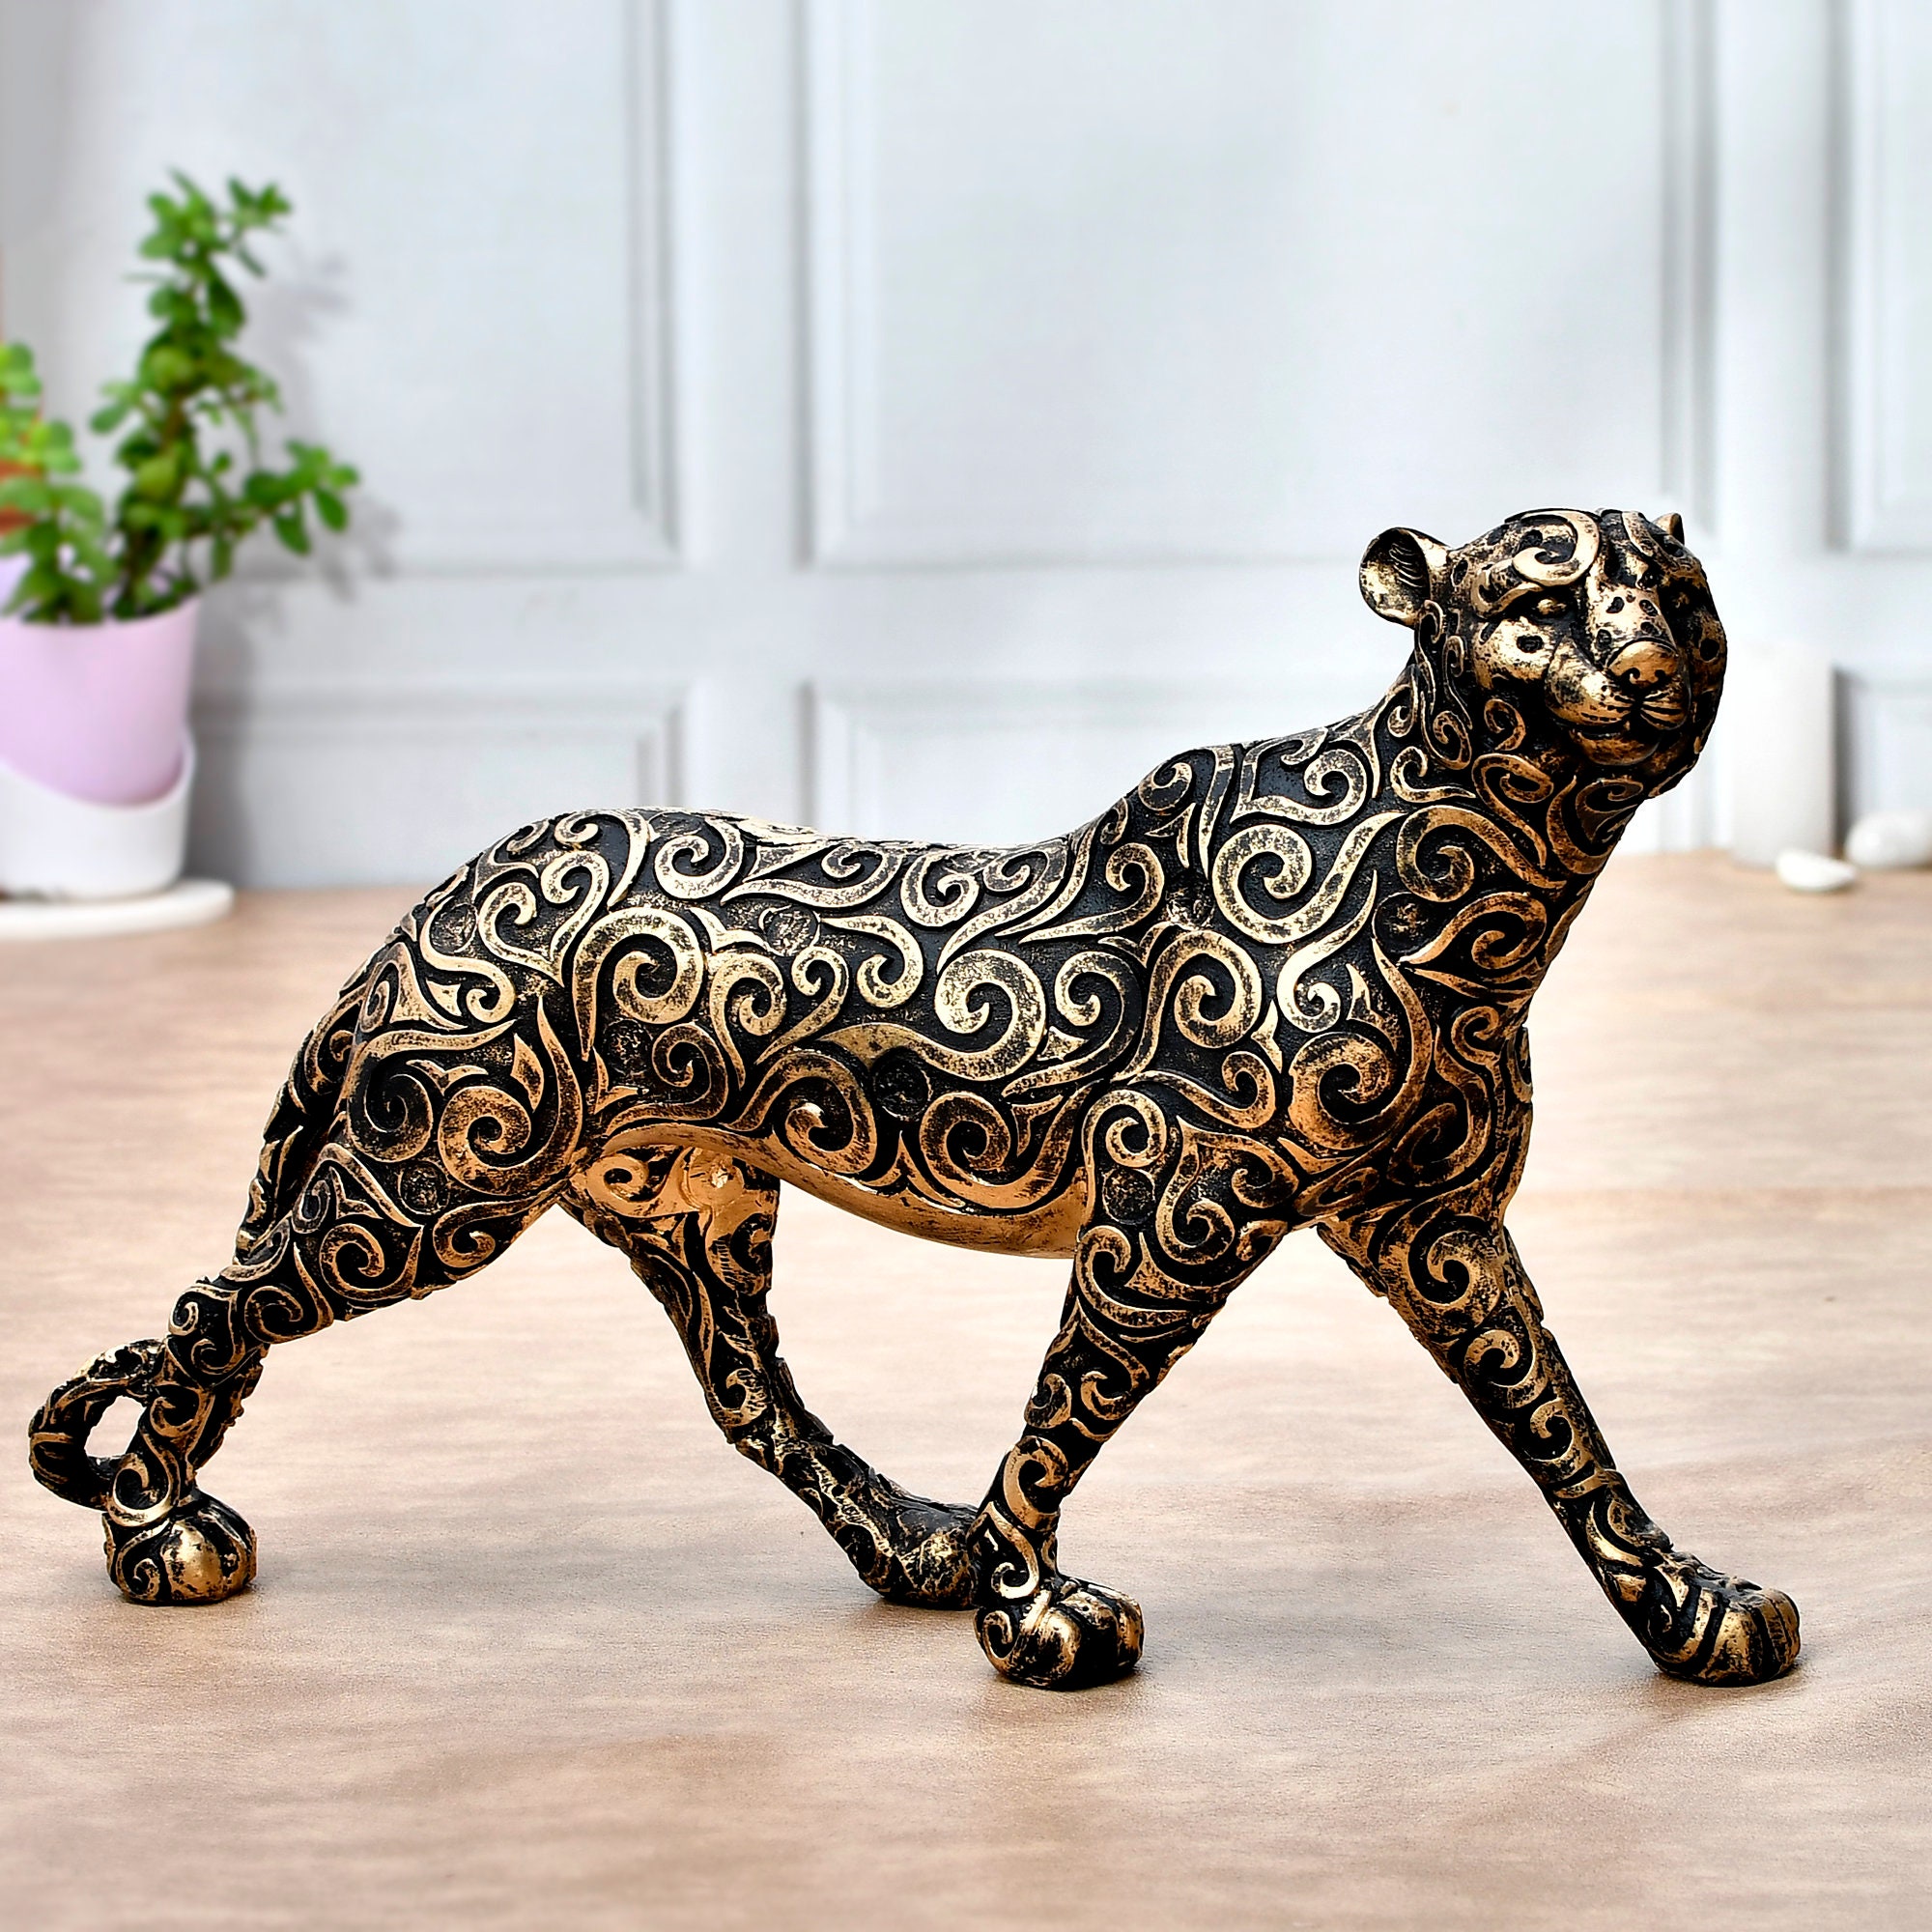 Black Leopard Statue Sitting on Table, Hand-painted Resin Leopard Figurine  for Home Décor 